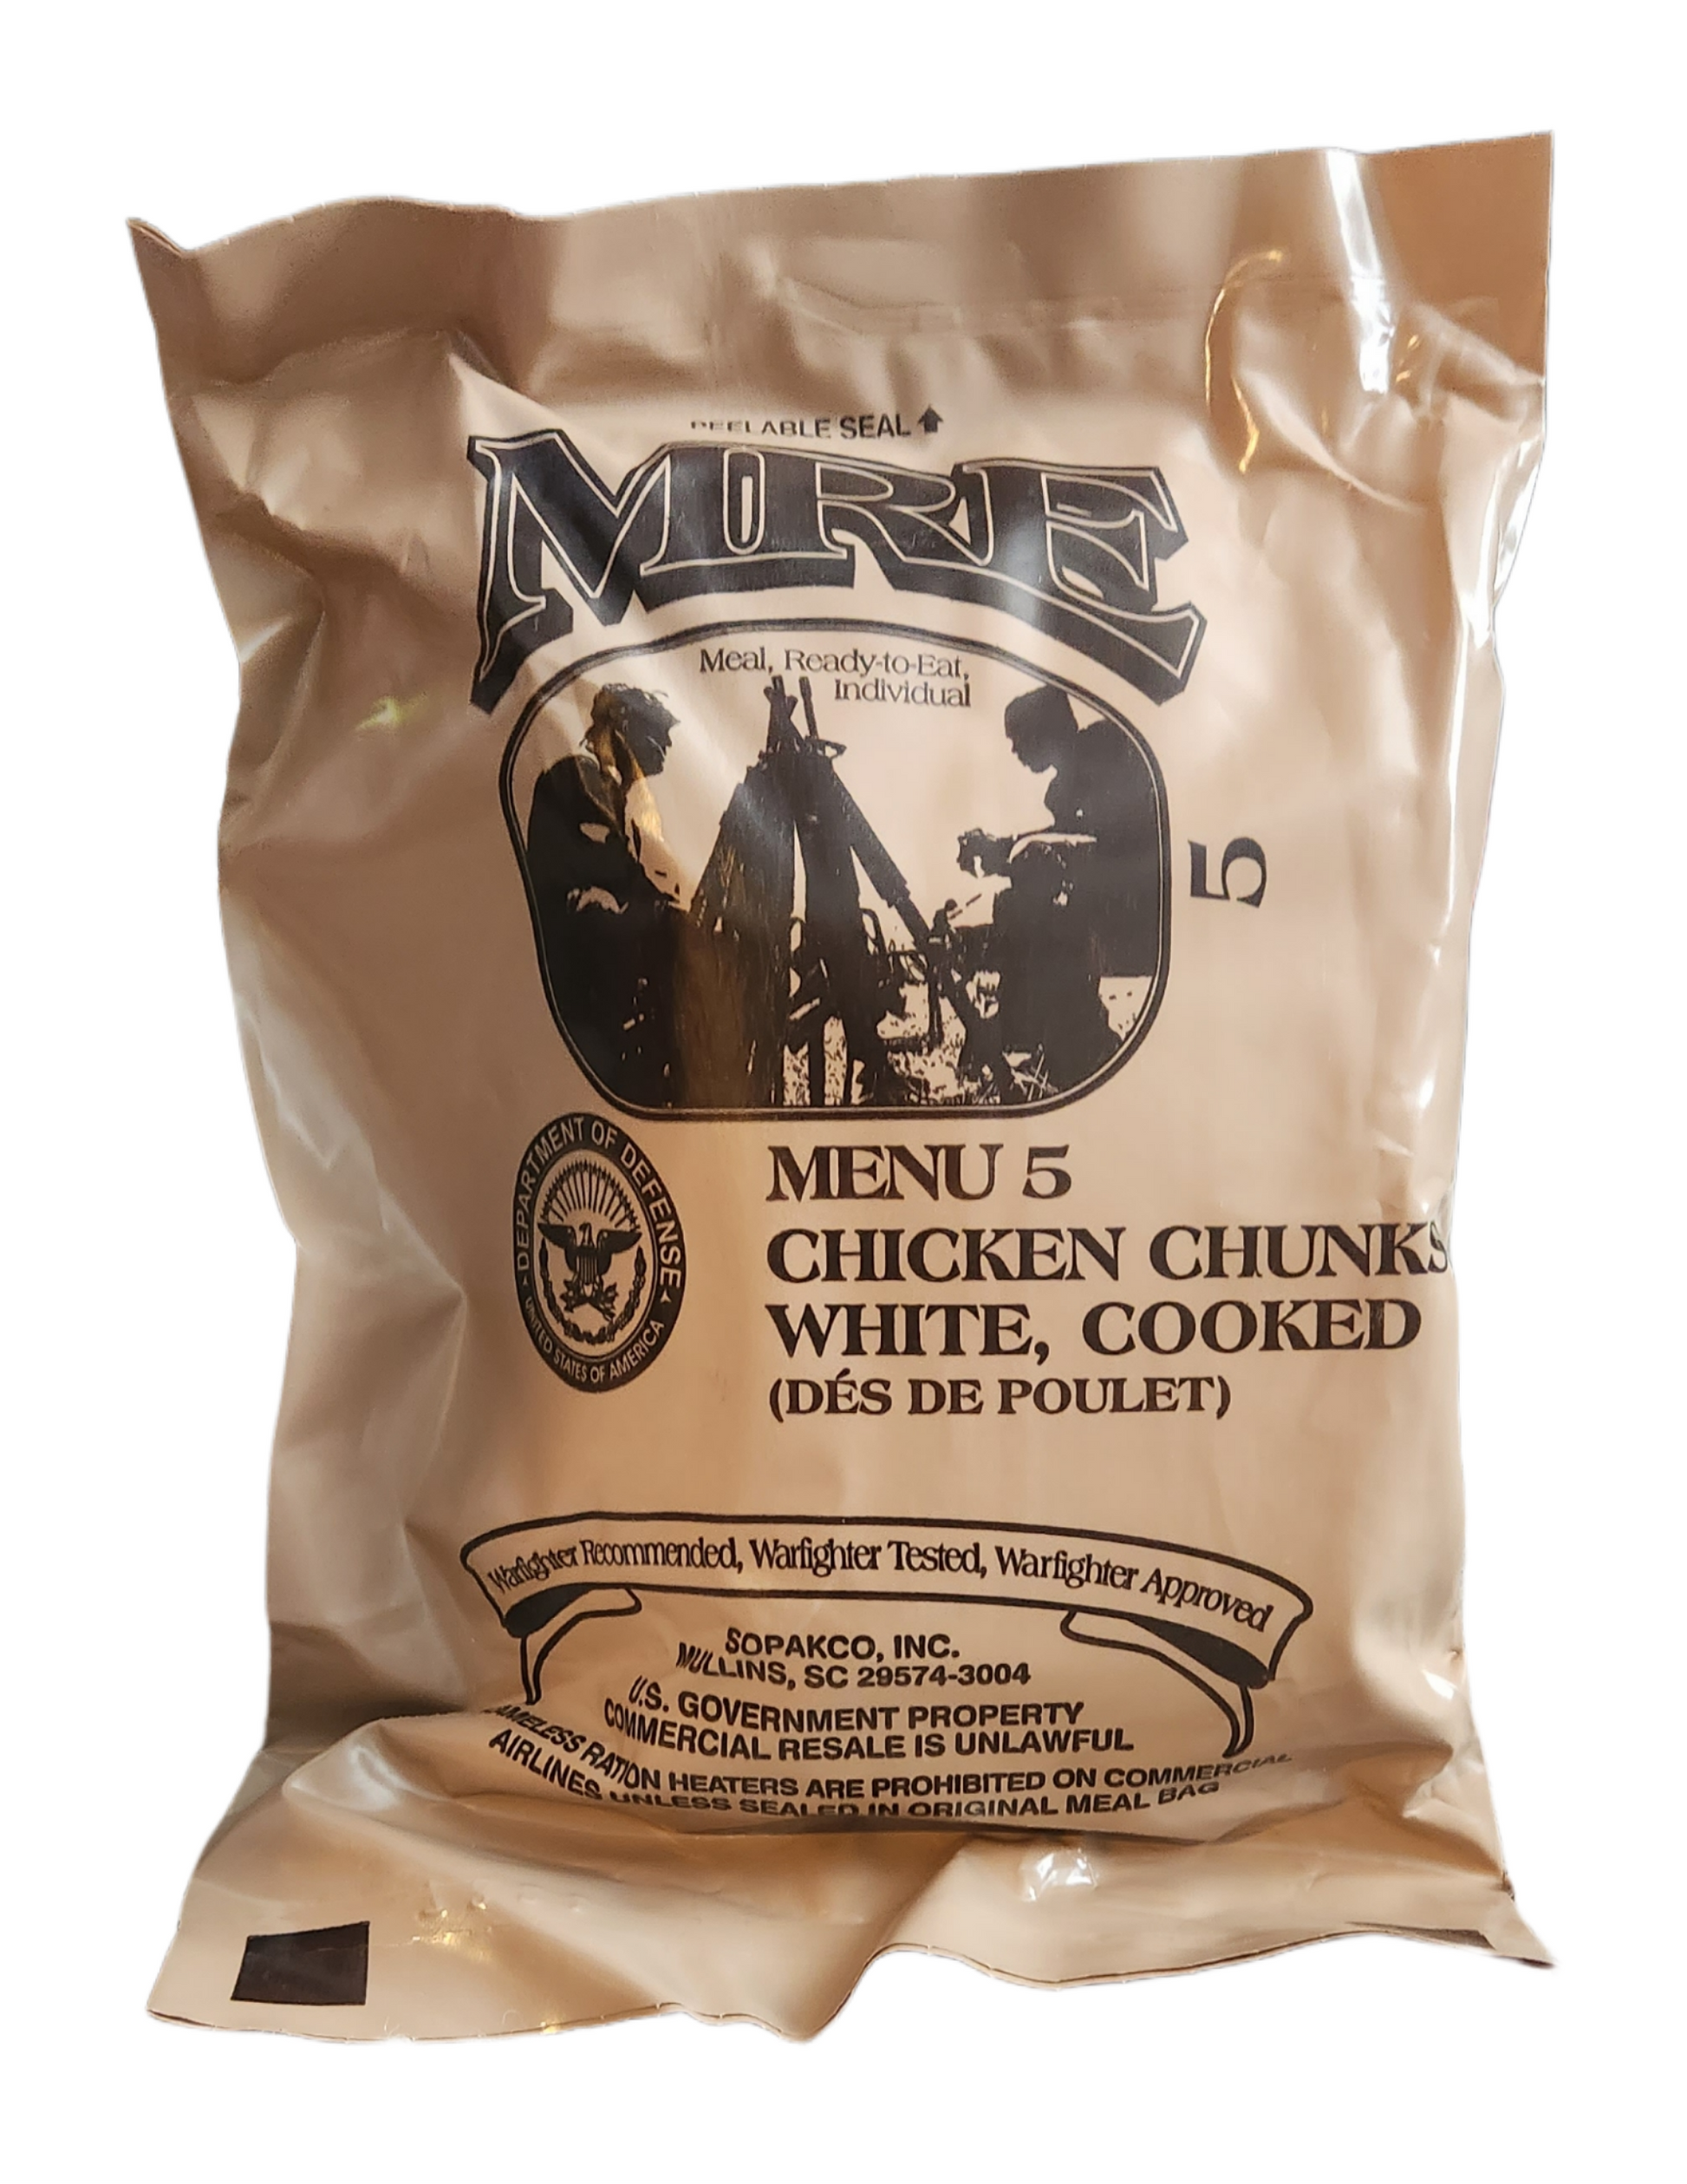 Shredded Beef Barbecue MRE Meal - Genuine US Military Surplus Inspection  Date 2020 and Up